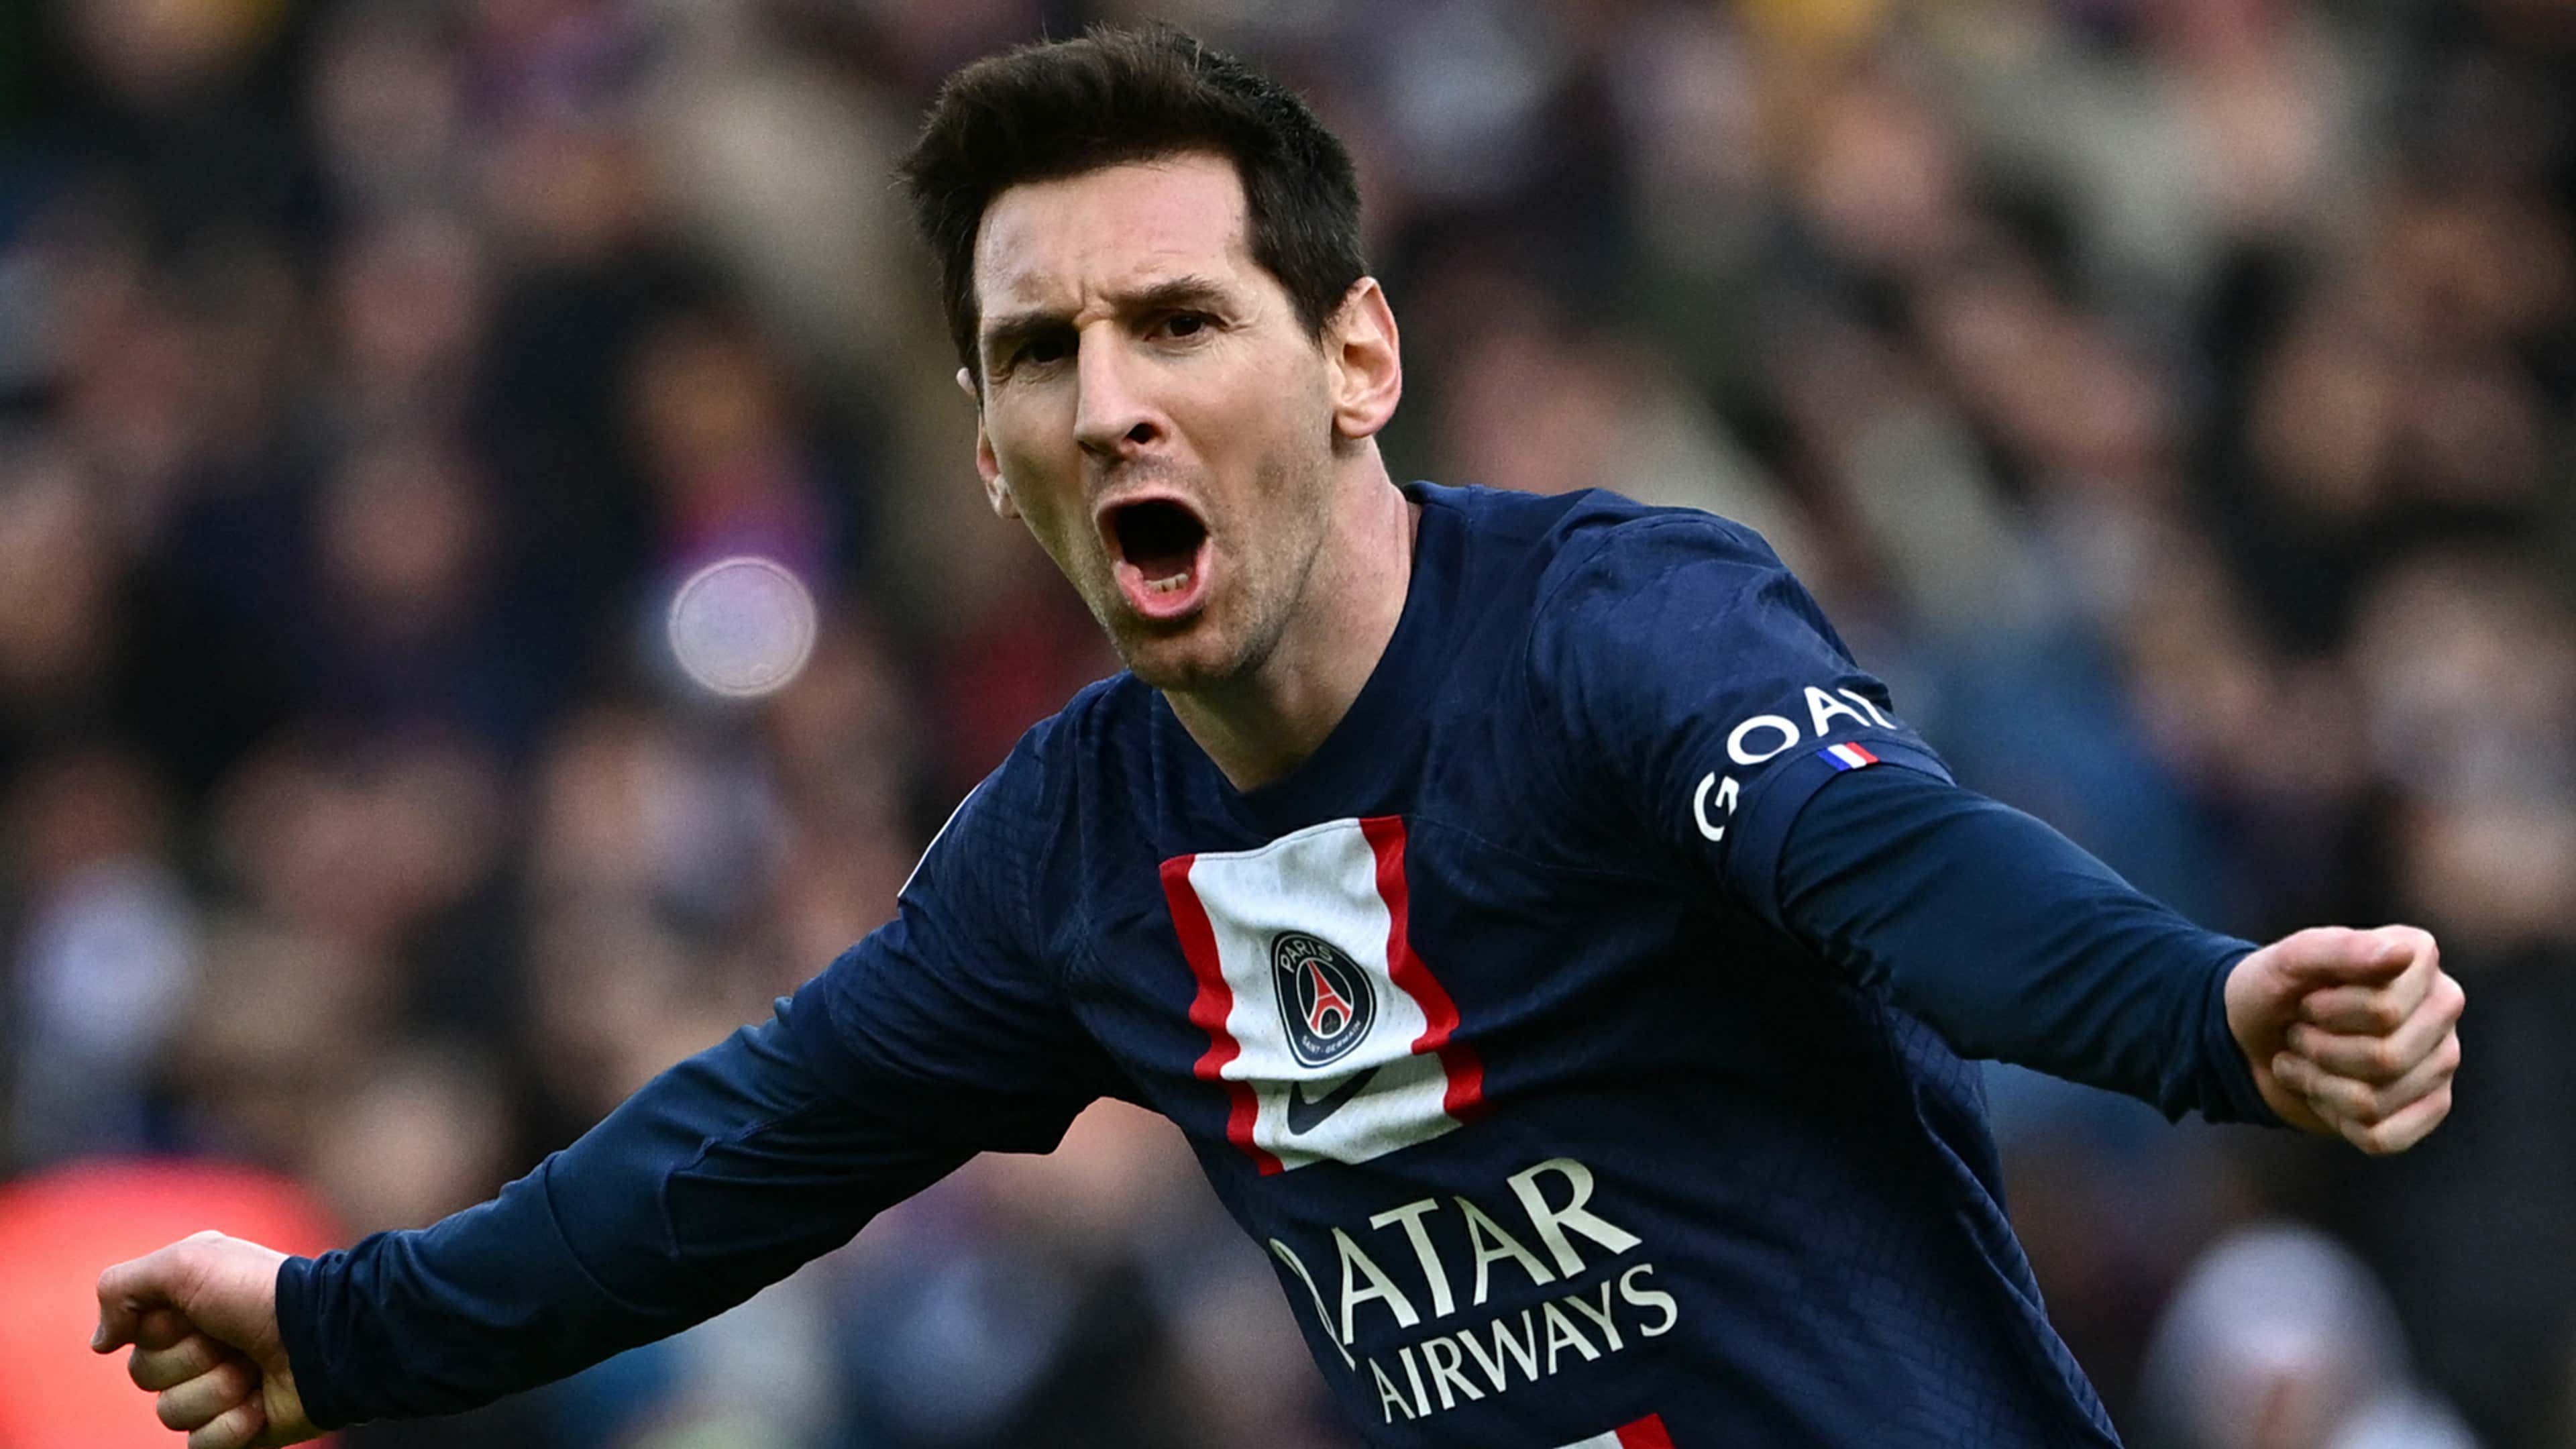 WATCH: Lionel Messi wins seven-goal thriller for PSG with spectacular  free-kick in 95th minute